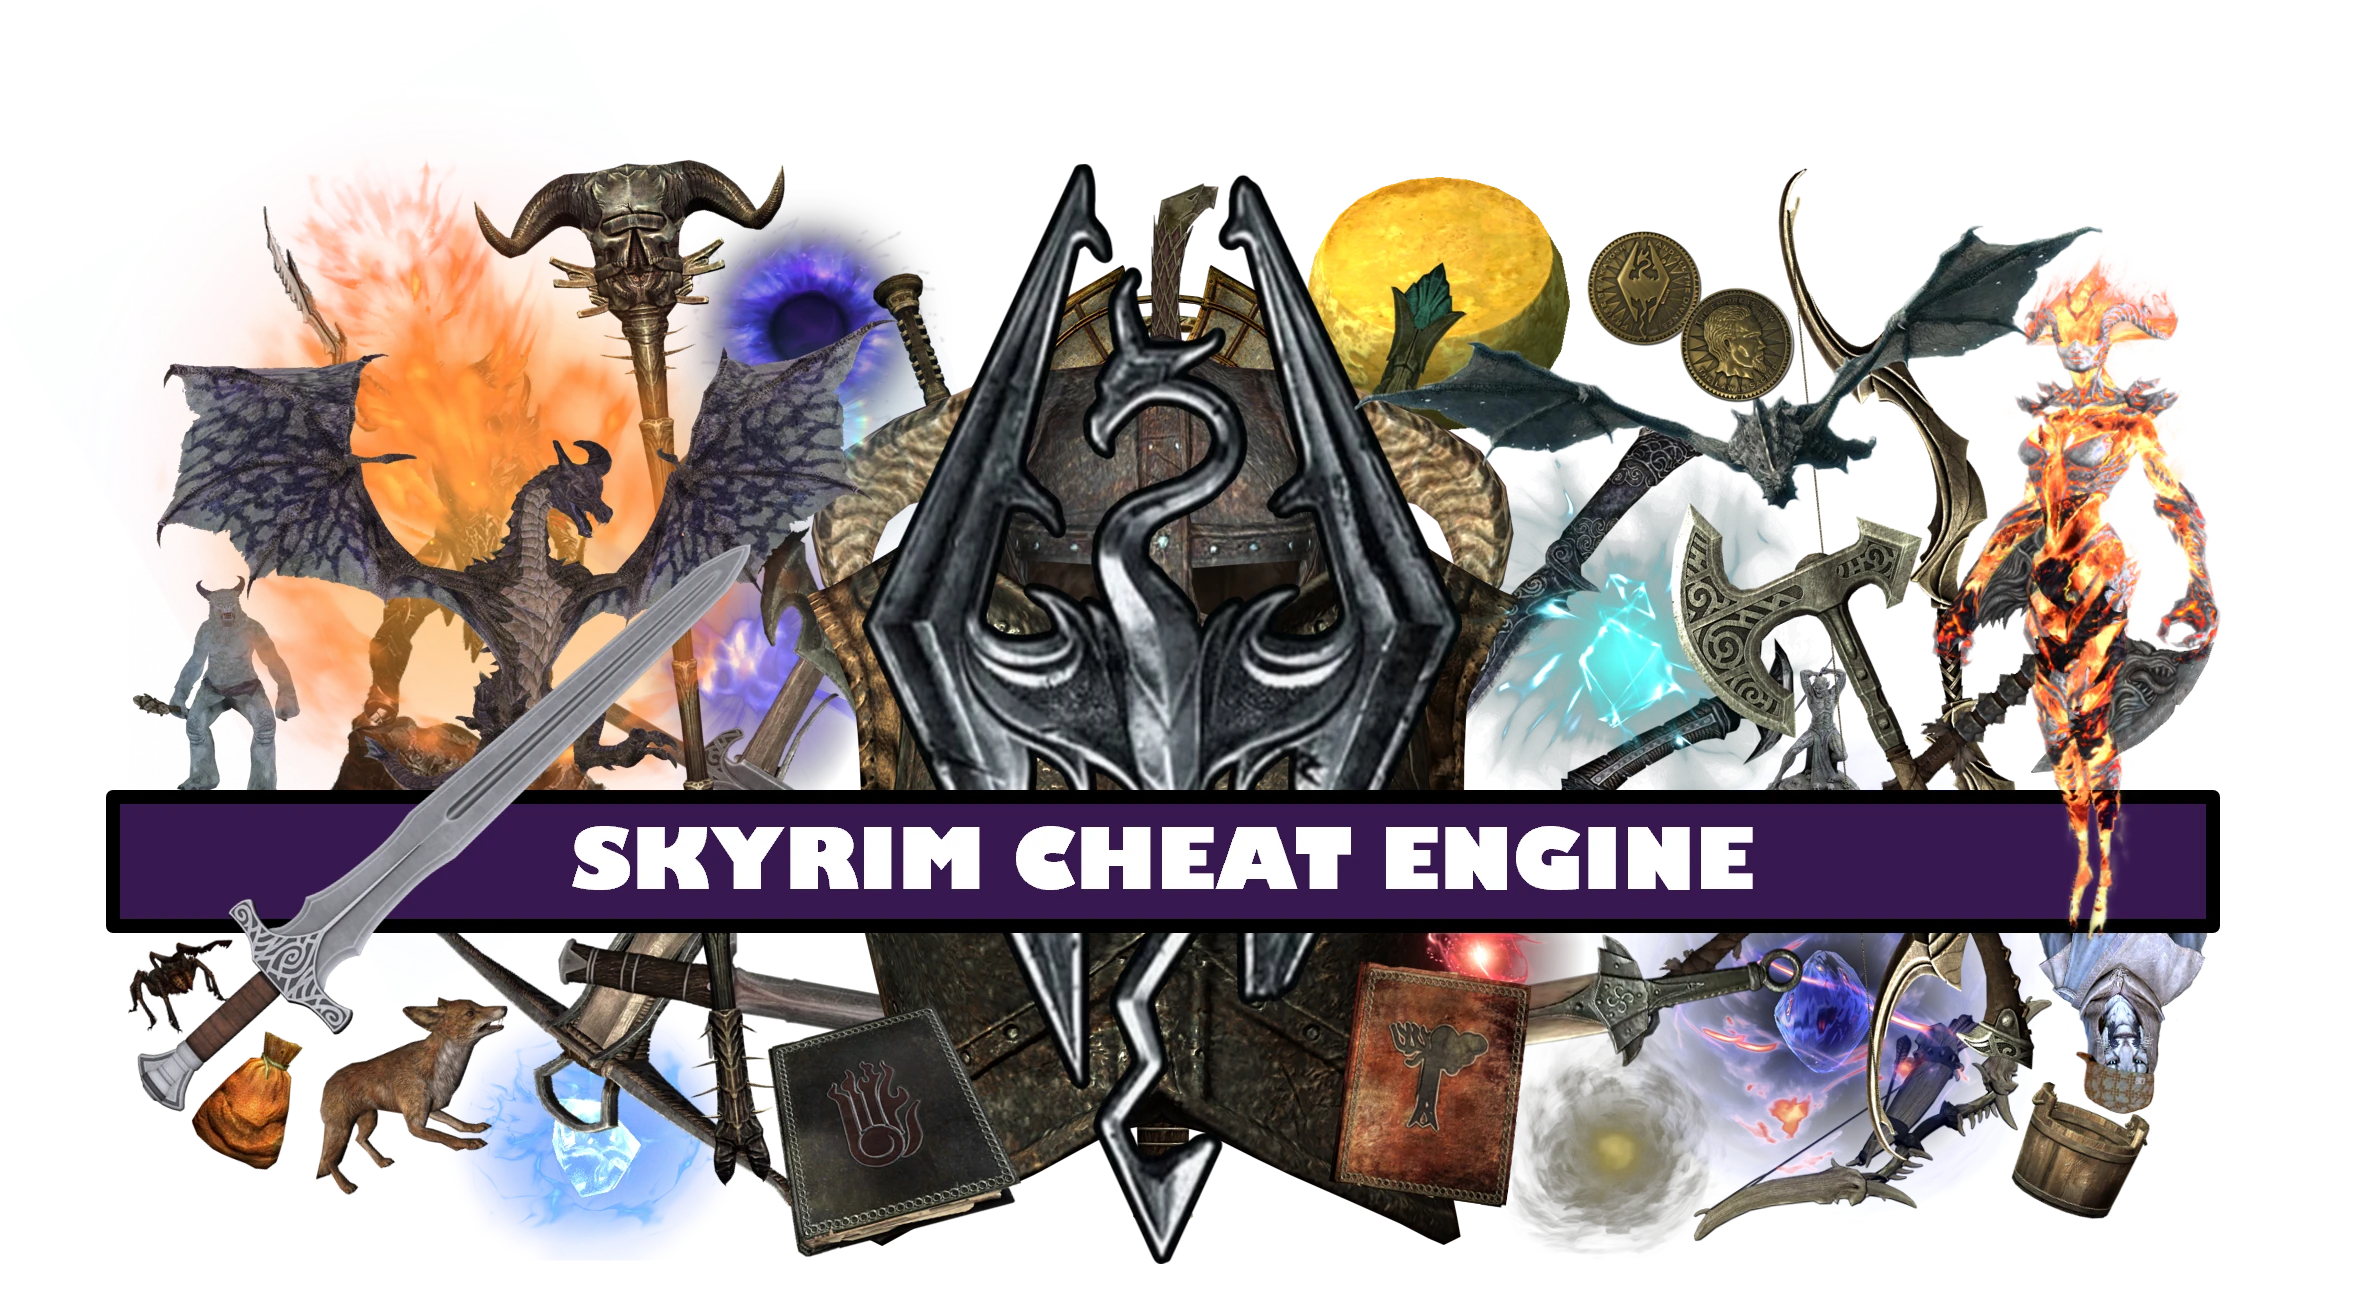 Engine Cheat Download - This is a tool designed to help you with modifying  single player games